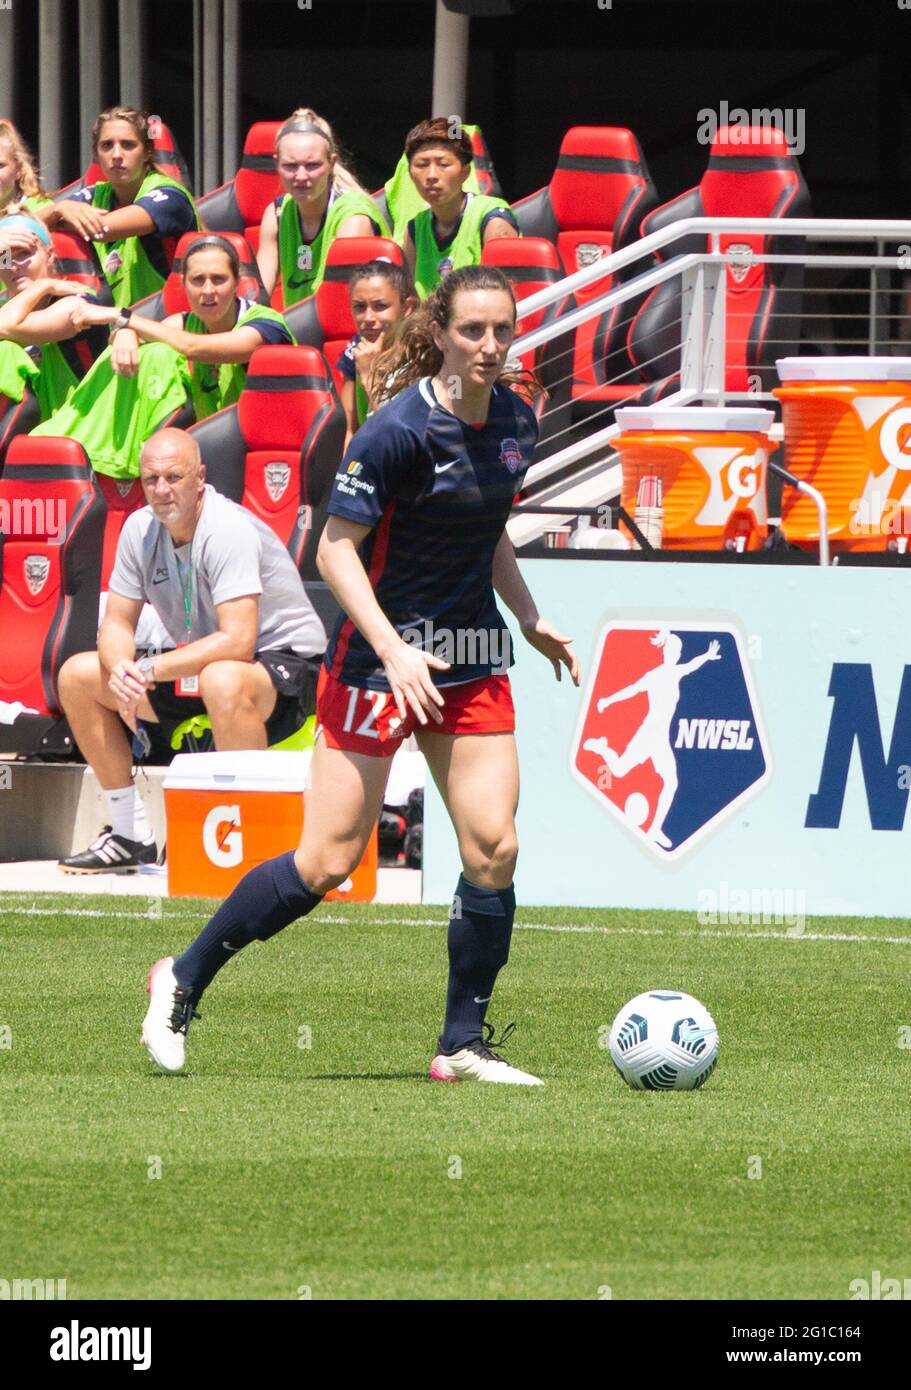 Washignton D.C, United States. 06th June, 2021. Andi Sullivan #12 controling the ball during the Washington Spirit's game against Orlando Pride at Audi Field in Washington, DC NO COMMERCIAL USAGE. Credit: SPP Sport Press Photo. /Alamy Live News Stock Photo